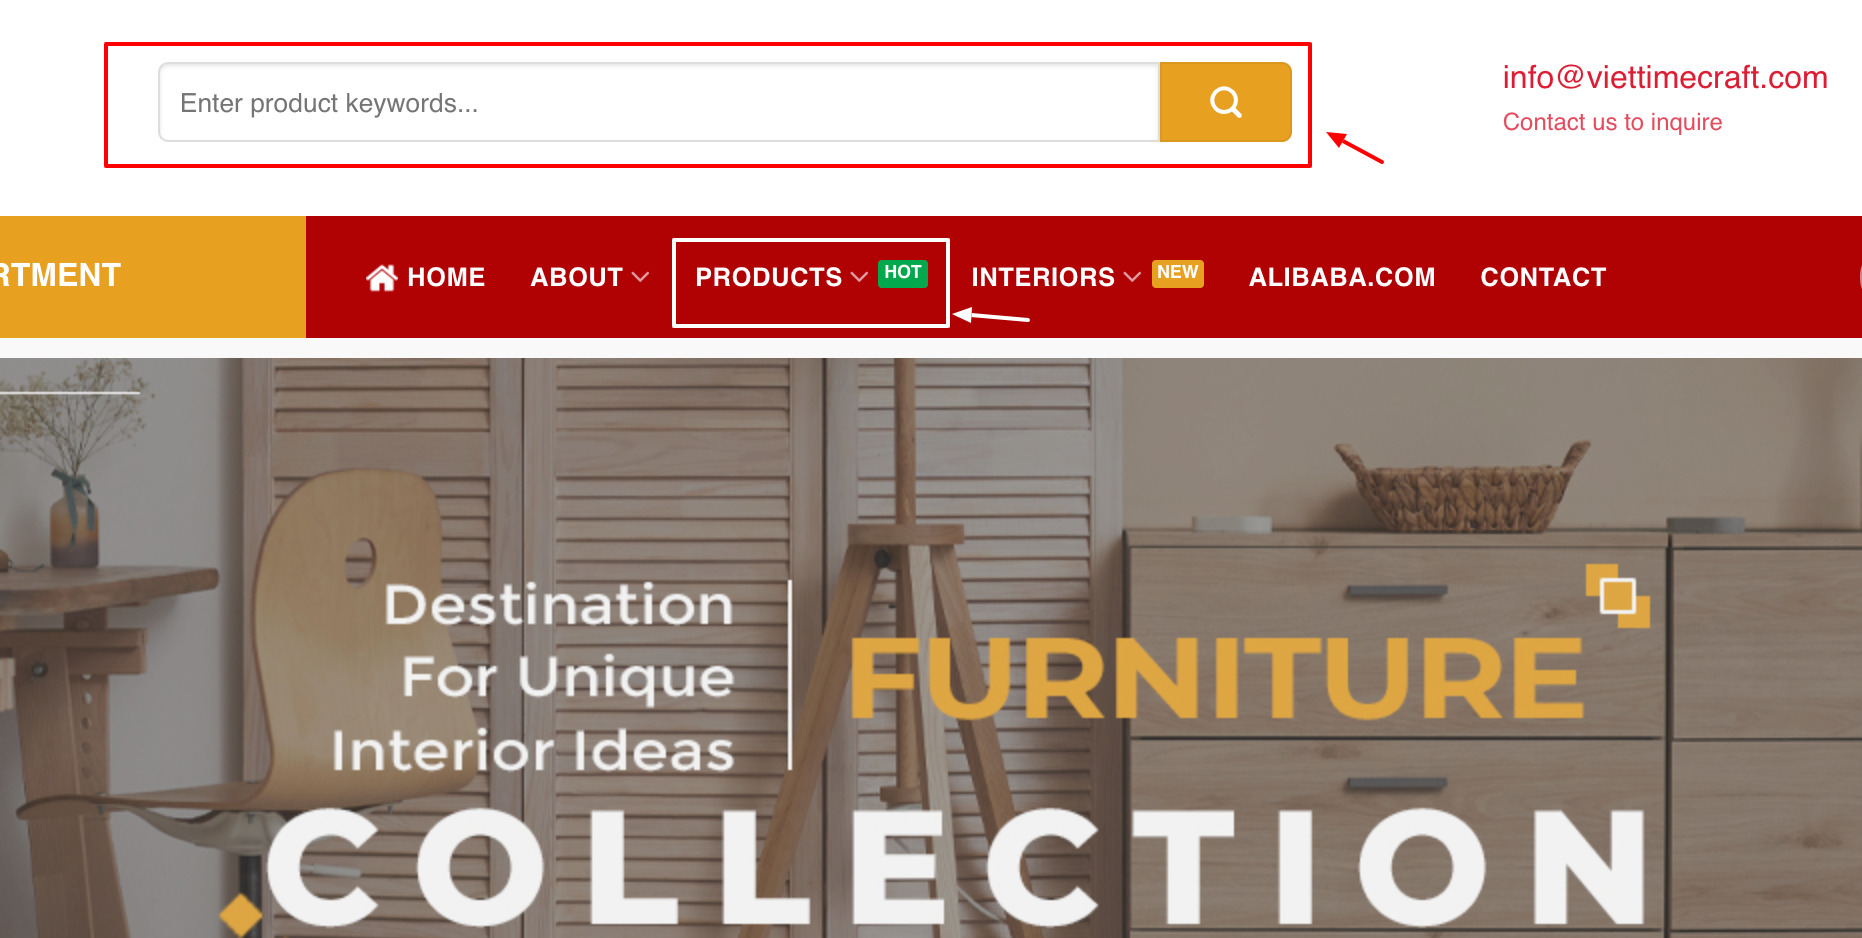 You can search for the product you need.